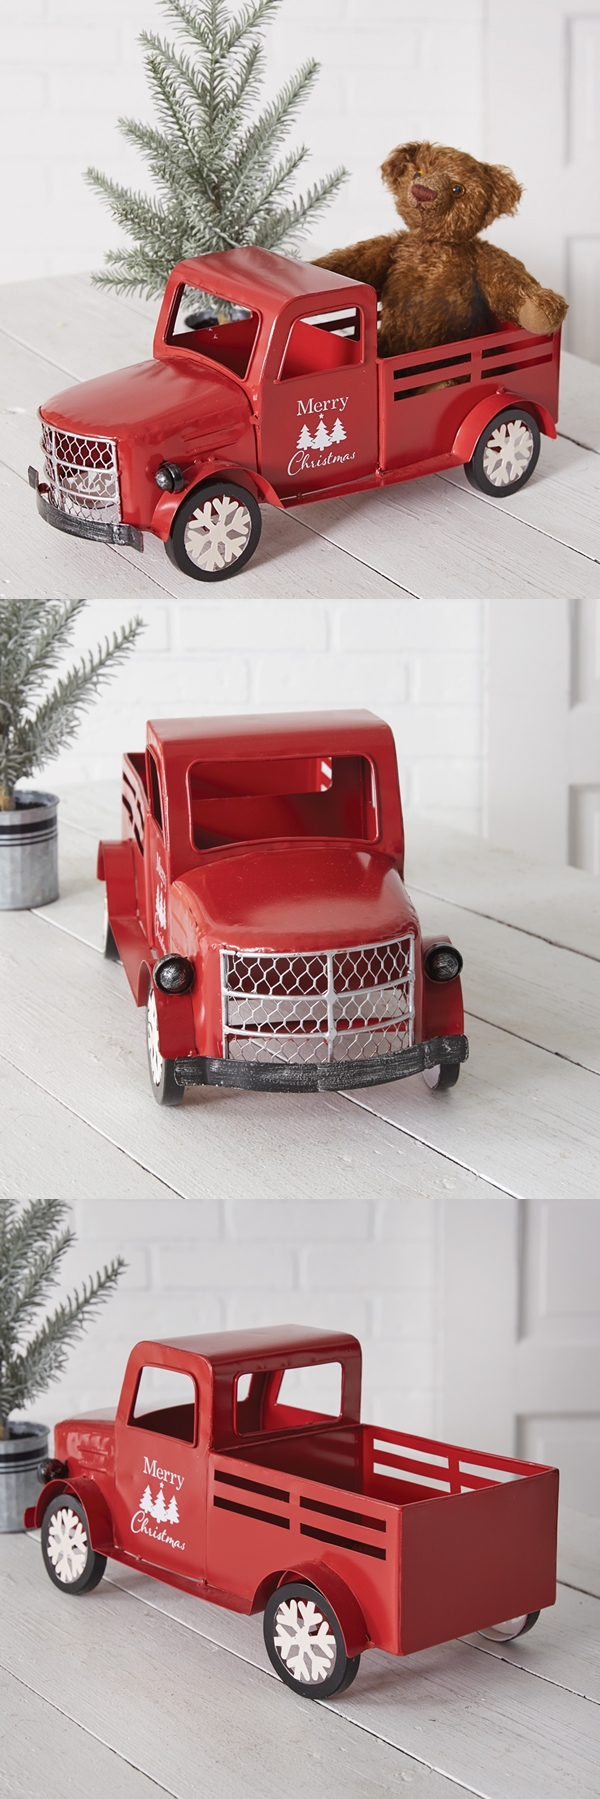 CTW Home Collection Tabletop "Merry Christmas" Red Truck